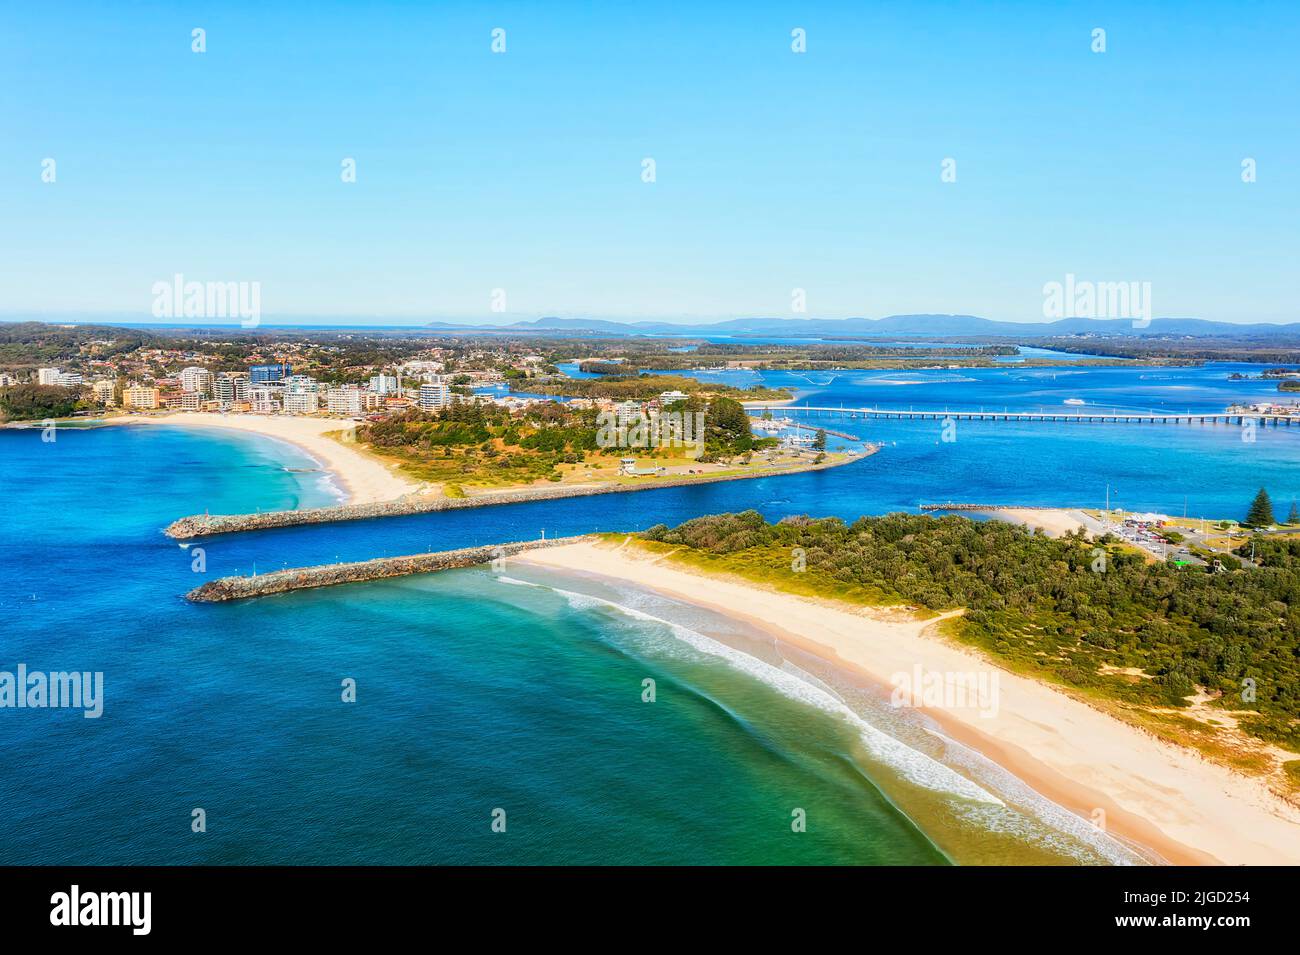 Entrance of Coolongolook river to Pacific ocean at Forster tuncurry towns in Australia - aerial view over beaches and waterfront. Stock Photo